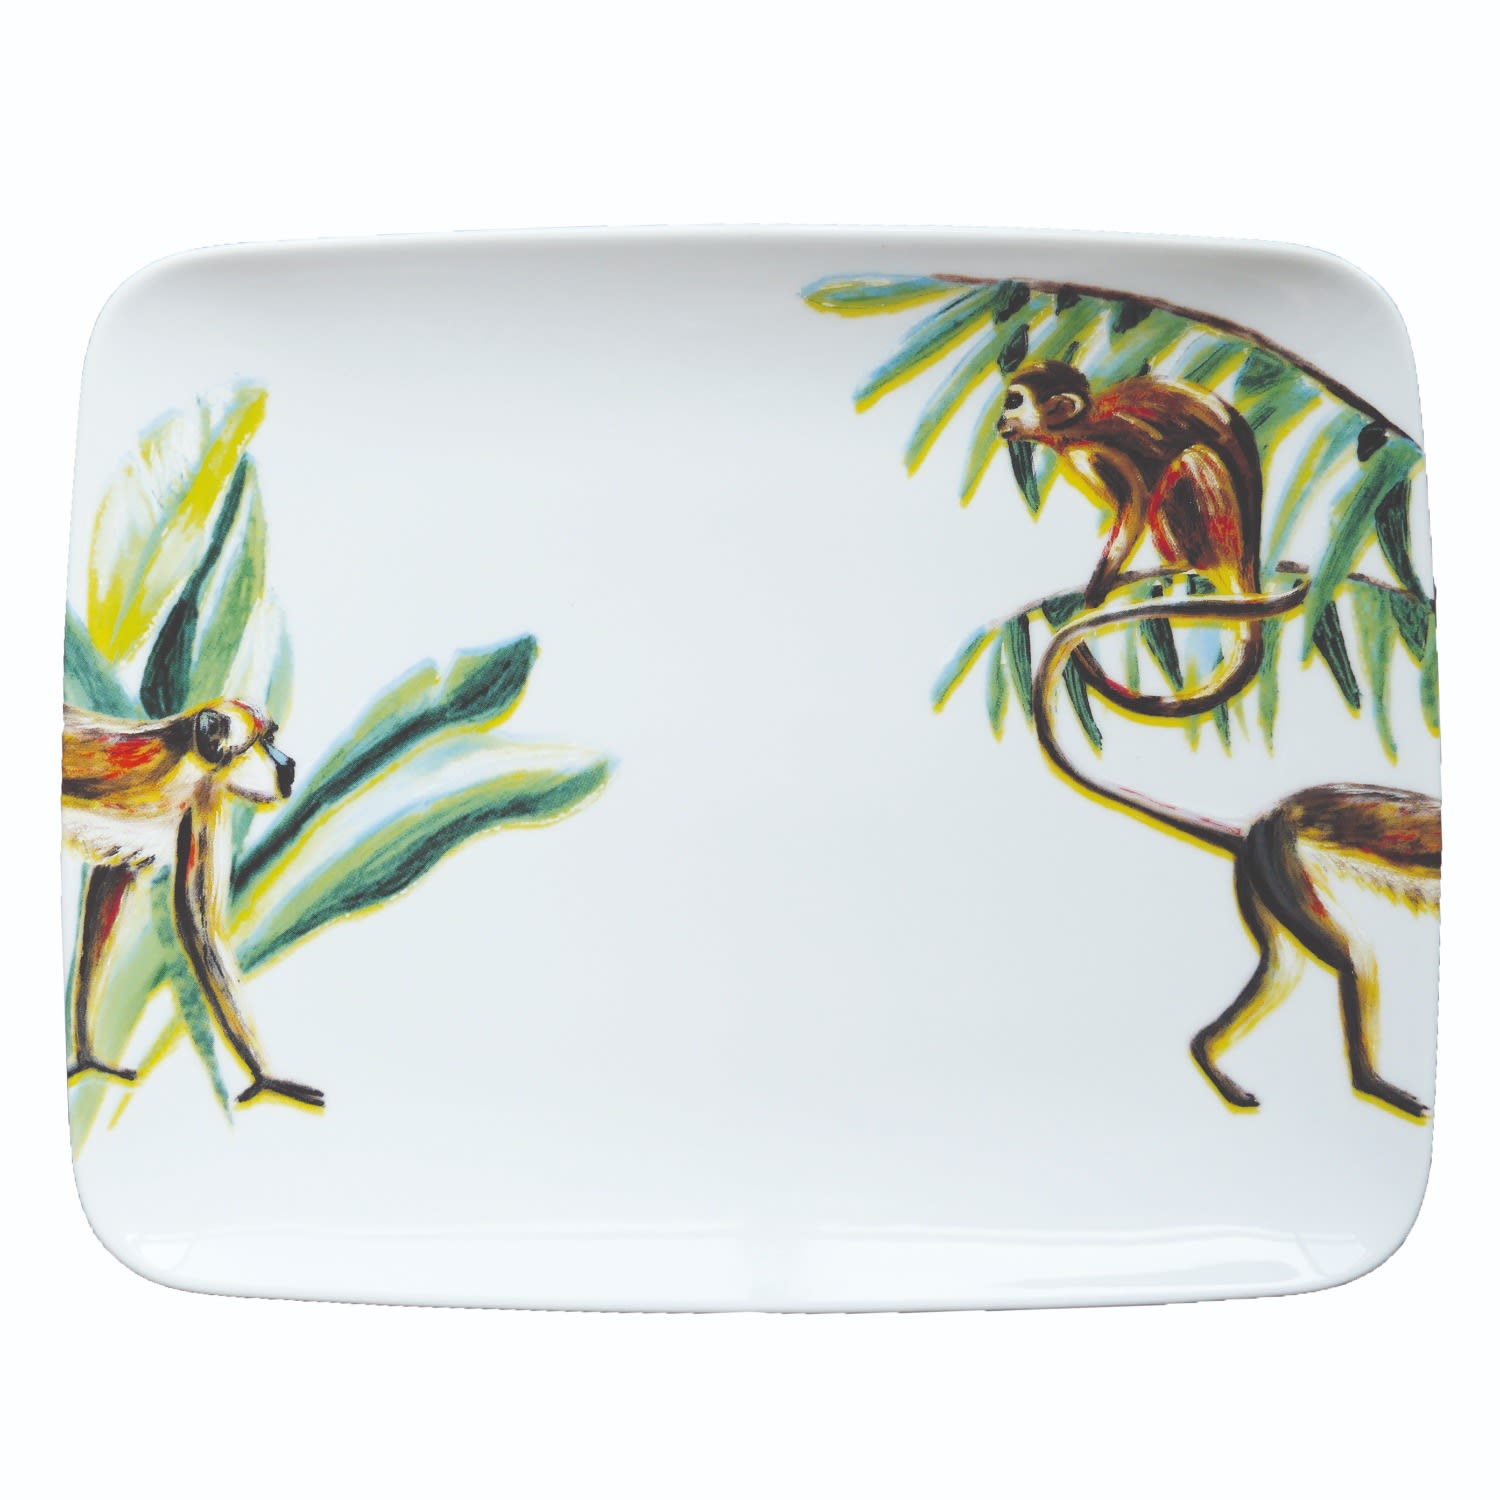 White Rectangle Plate/ Serving Platter Jungle Stories Monkey Catchii